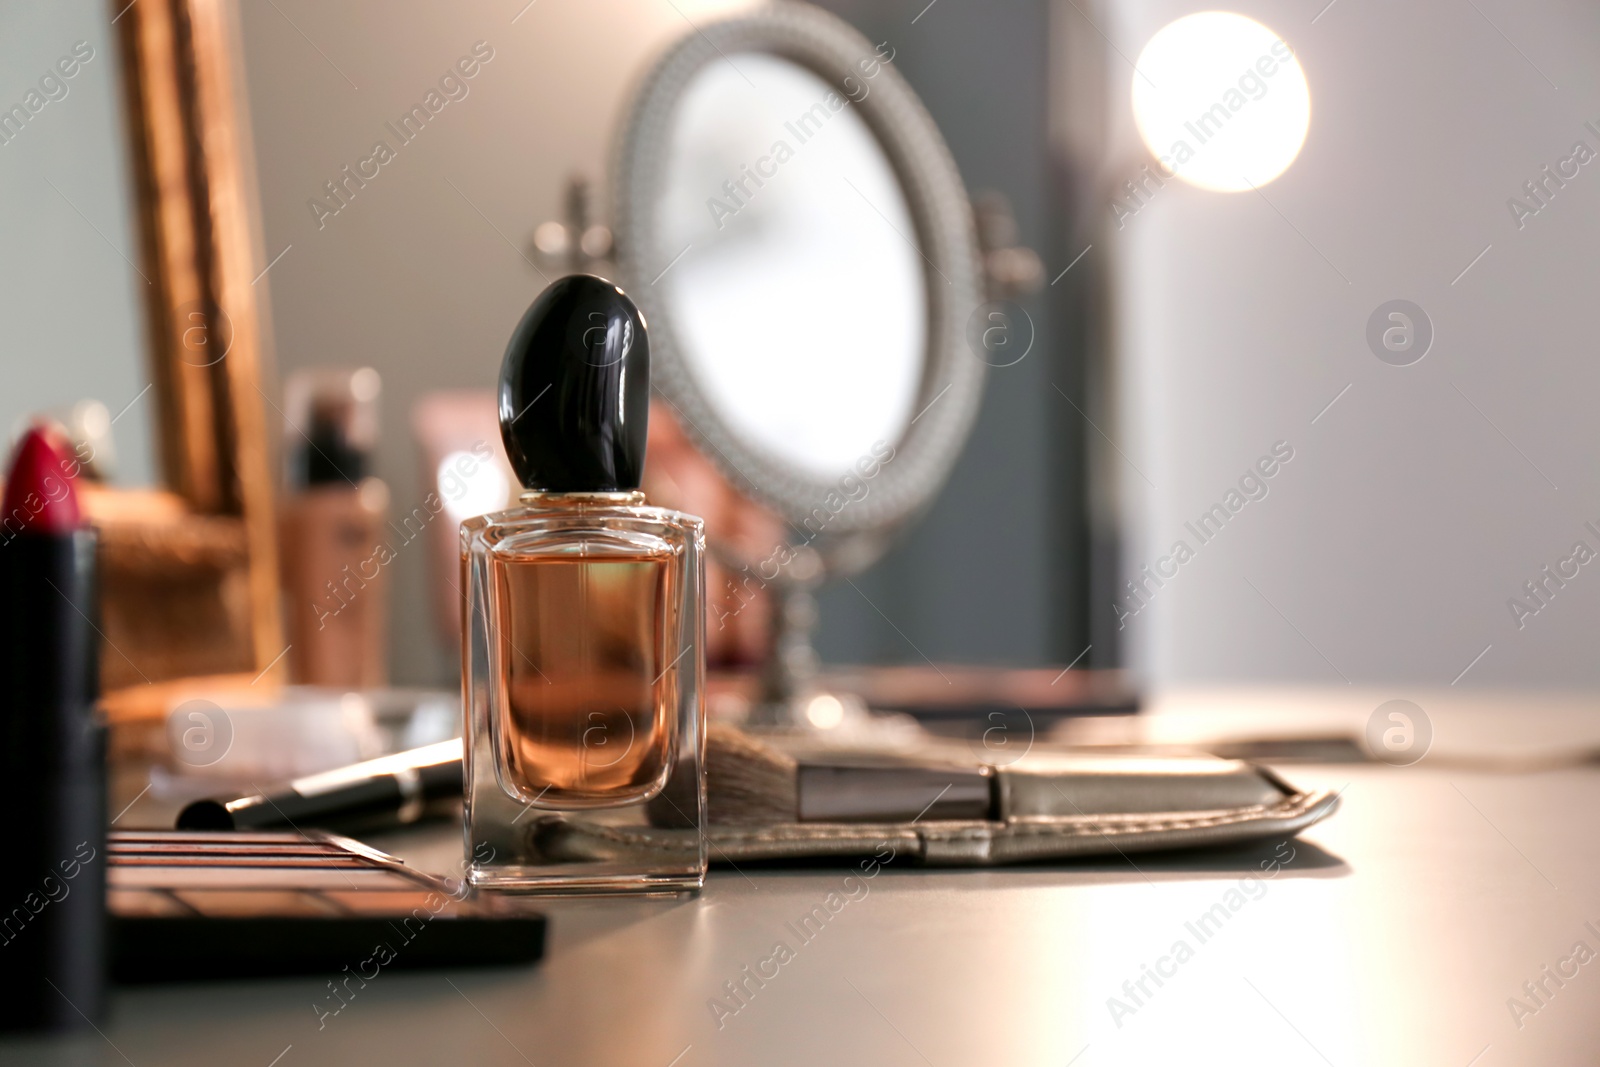 Photo of Bottle of perfume and makeup products on dressing table